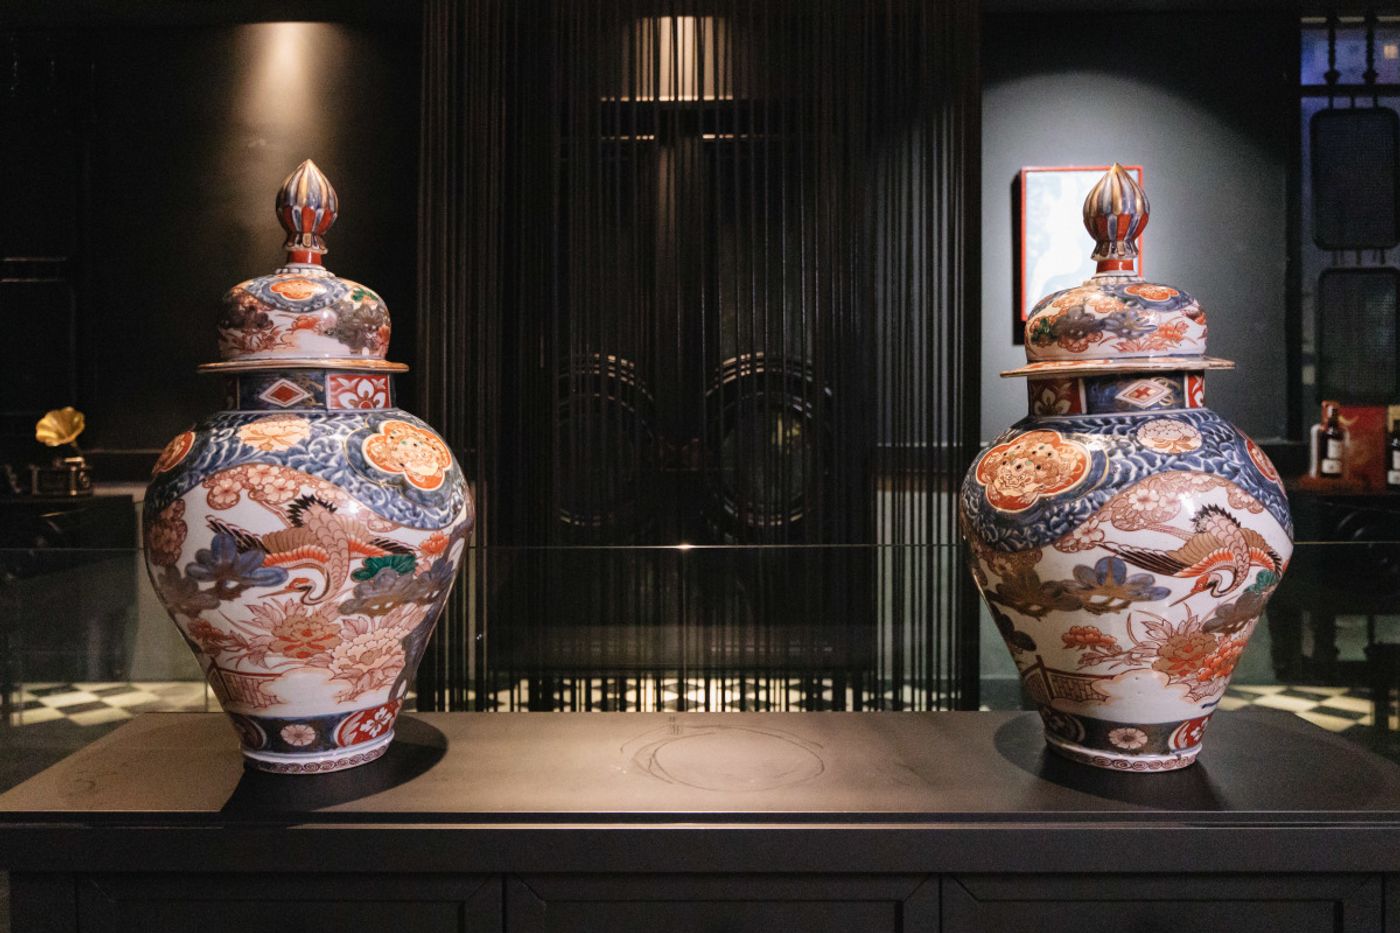 'Acculturation: Culture Influence On Art' at Indochine House